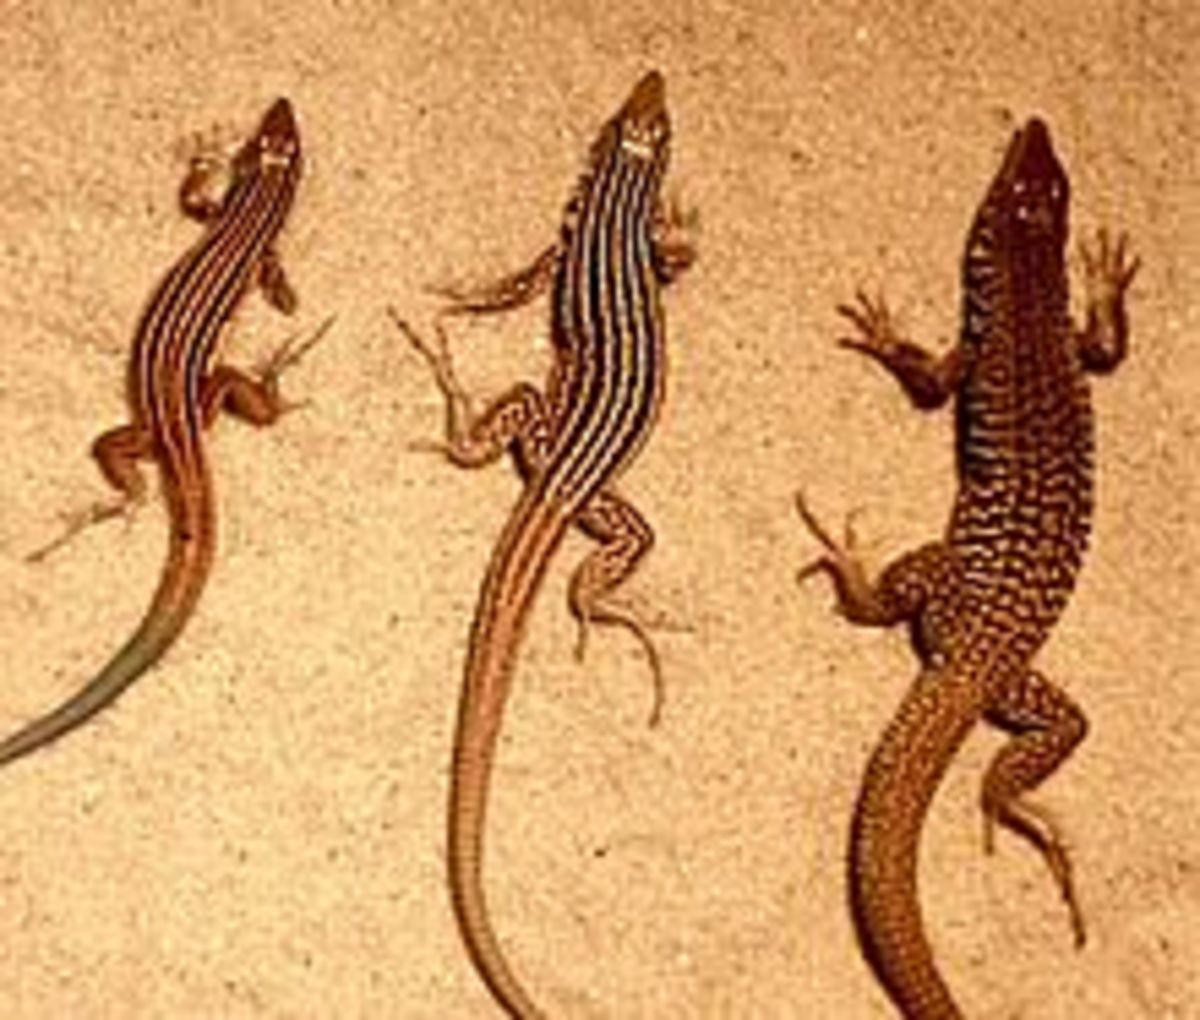 The New Mexico whiptail, or C. neomexicanus (middle).